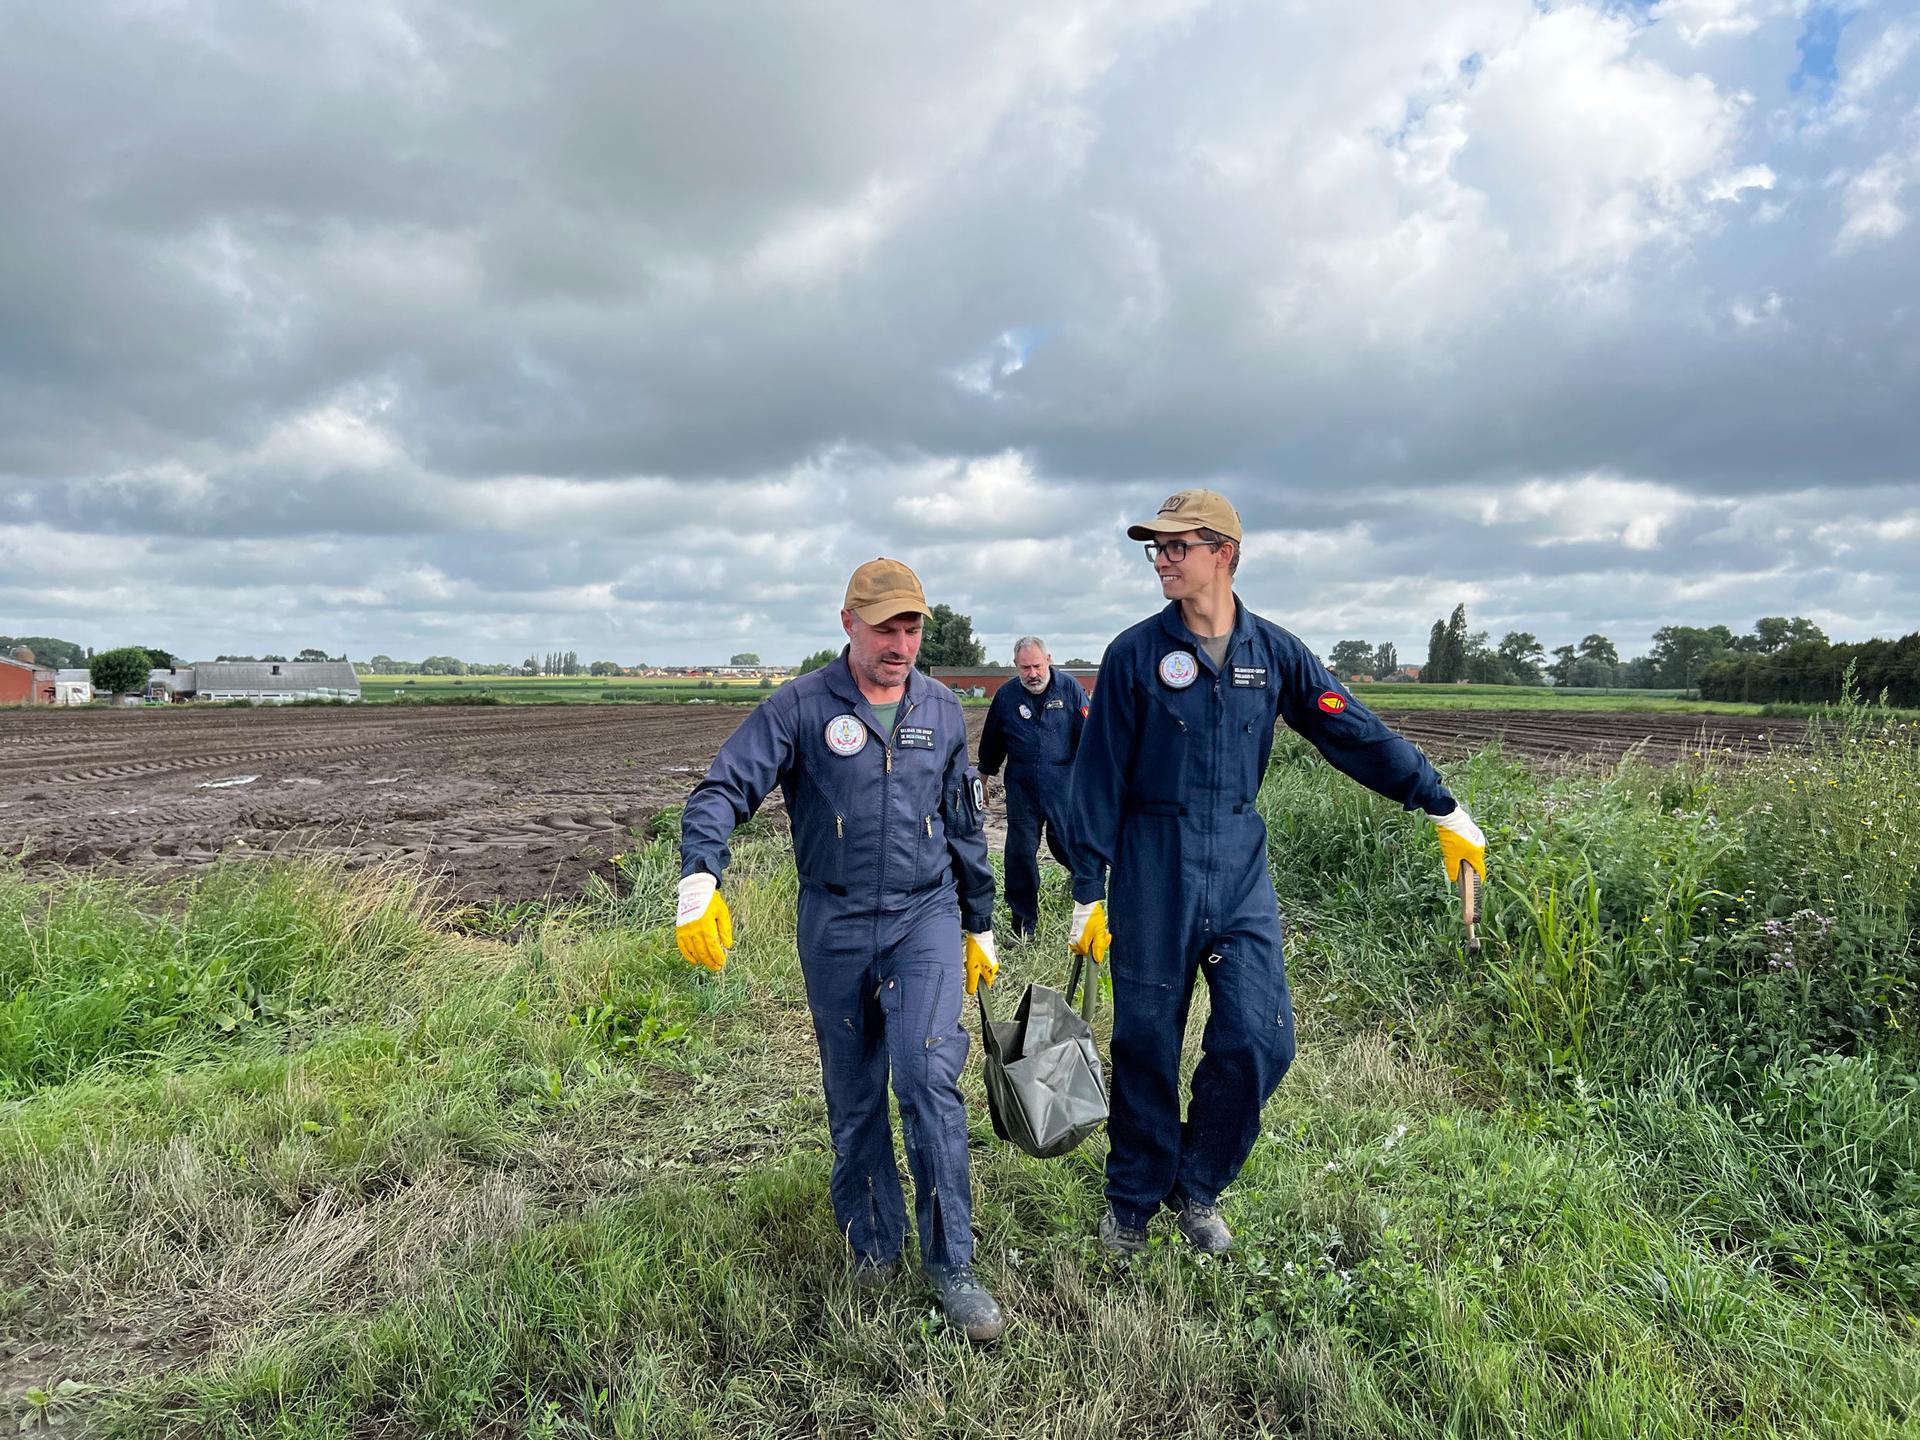 Members of Belgium’s bomb disposal unit Warrant Officer Steven de Meulenaere, left, and First Sergeant Sander Poelmans, right, carry a German 15-centimeter high explosive shell manufactured in 1914 away from the field where a farmer found it.